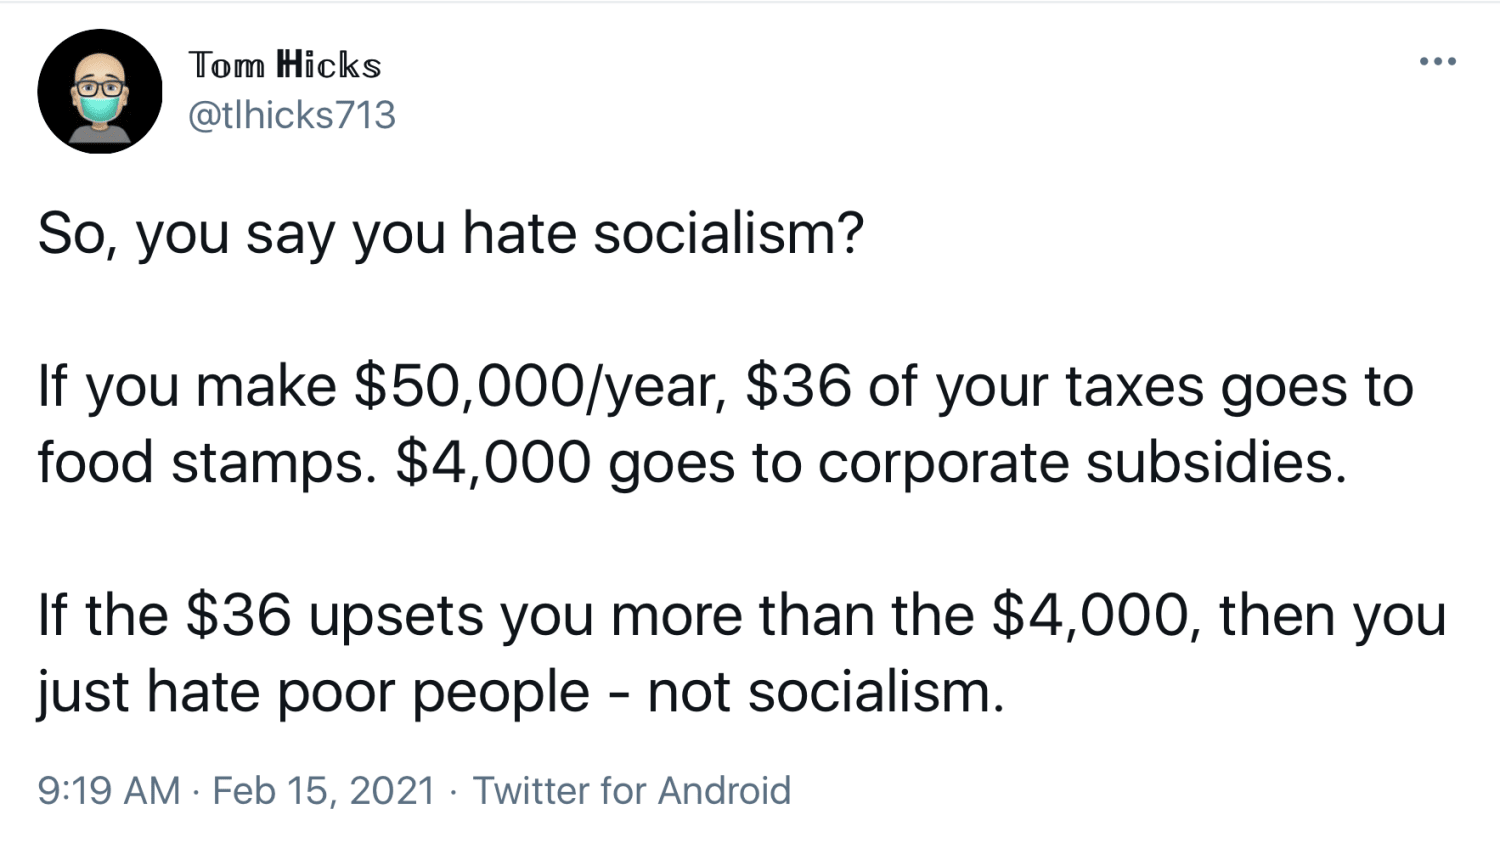 So, you say you hate socialism?